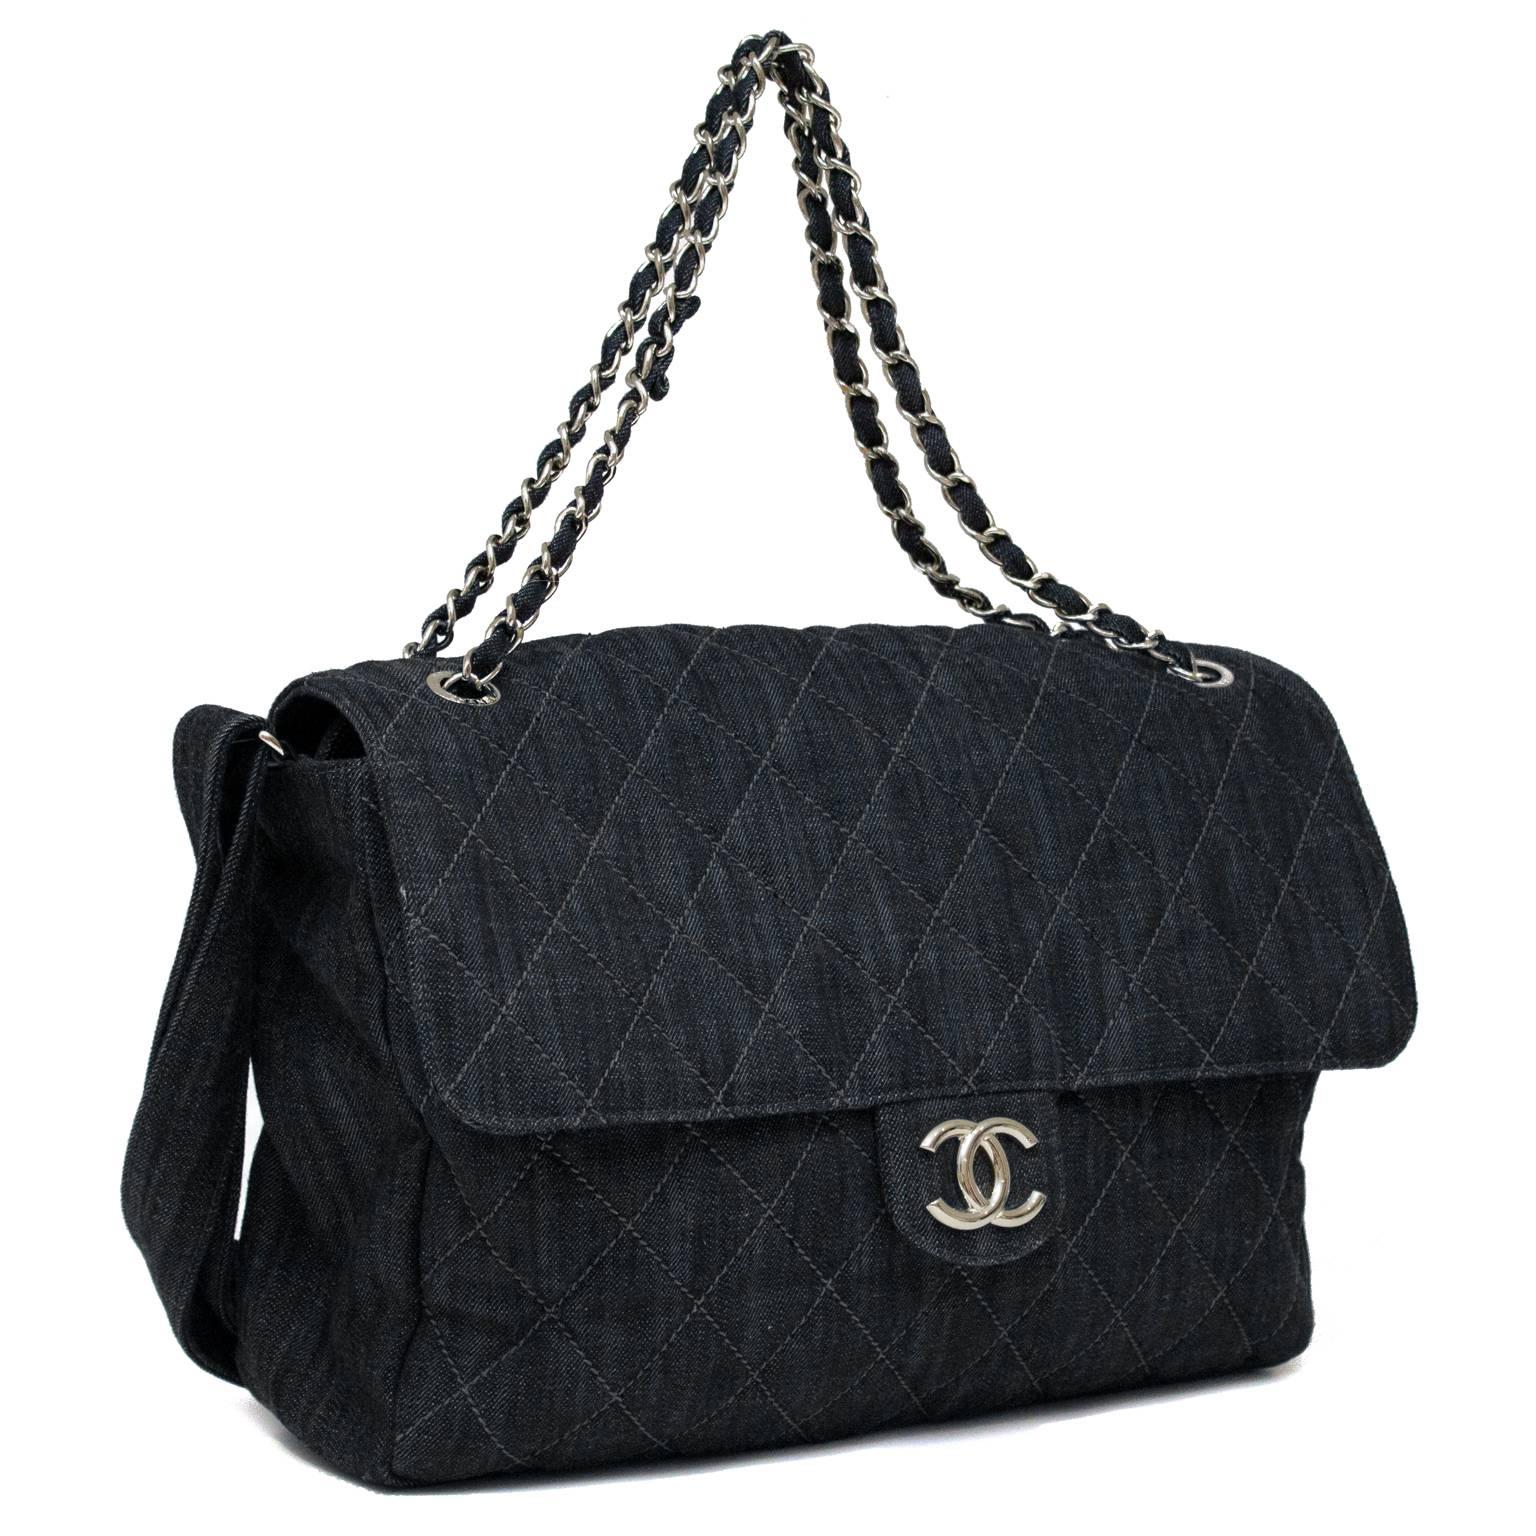 Chanel Jumbo 2.55 denim handbag from 2008. The bag is stitch quilted and features two straps; a classic silver tone chain that can be doubled and a wide denim shoulder strap that is adjustable and can be worn crossbody with reinforced navy leather